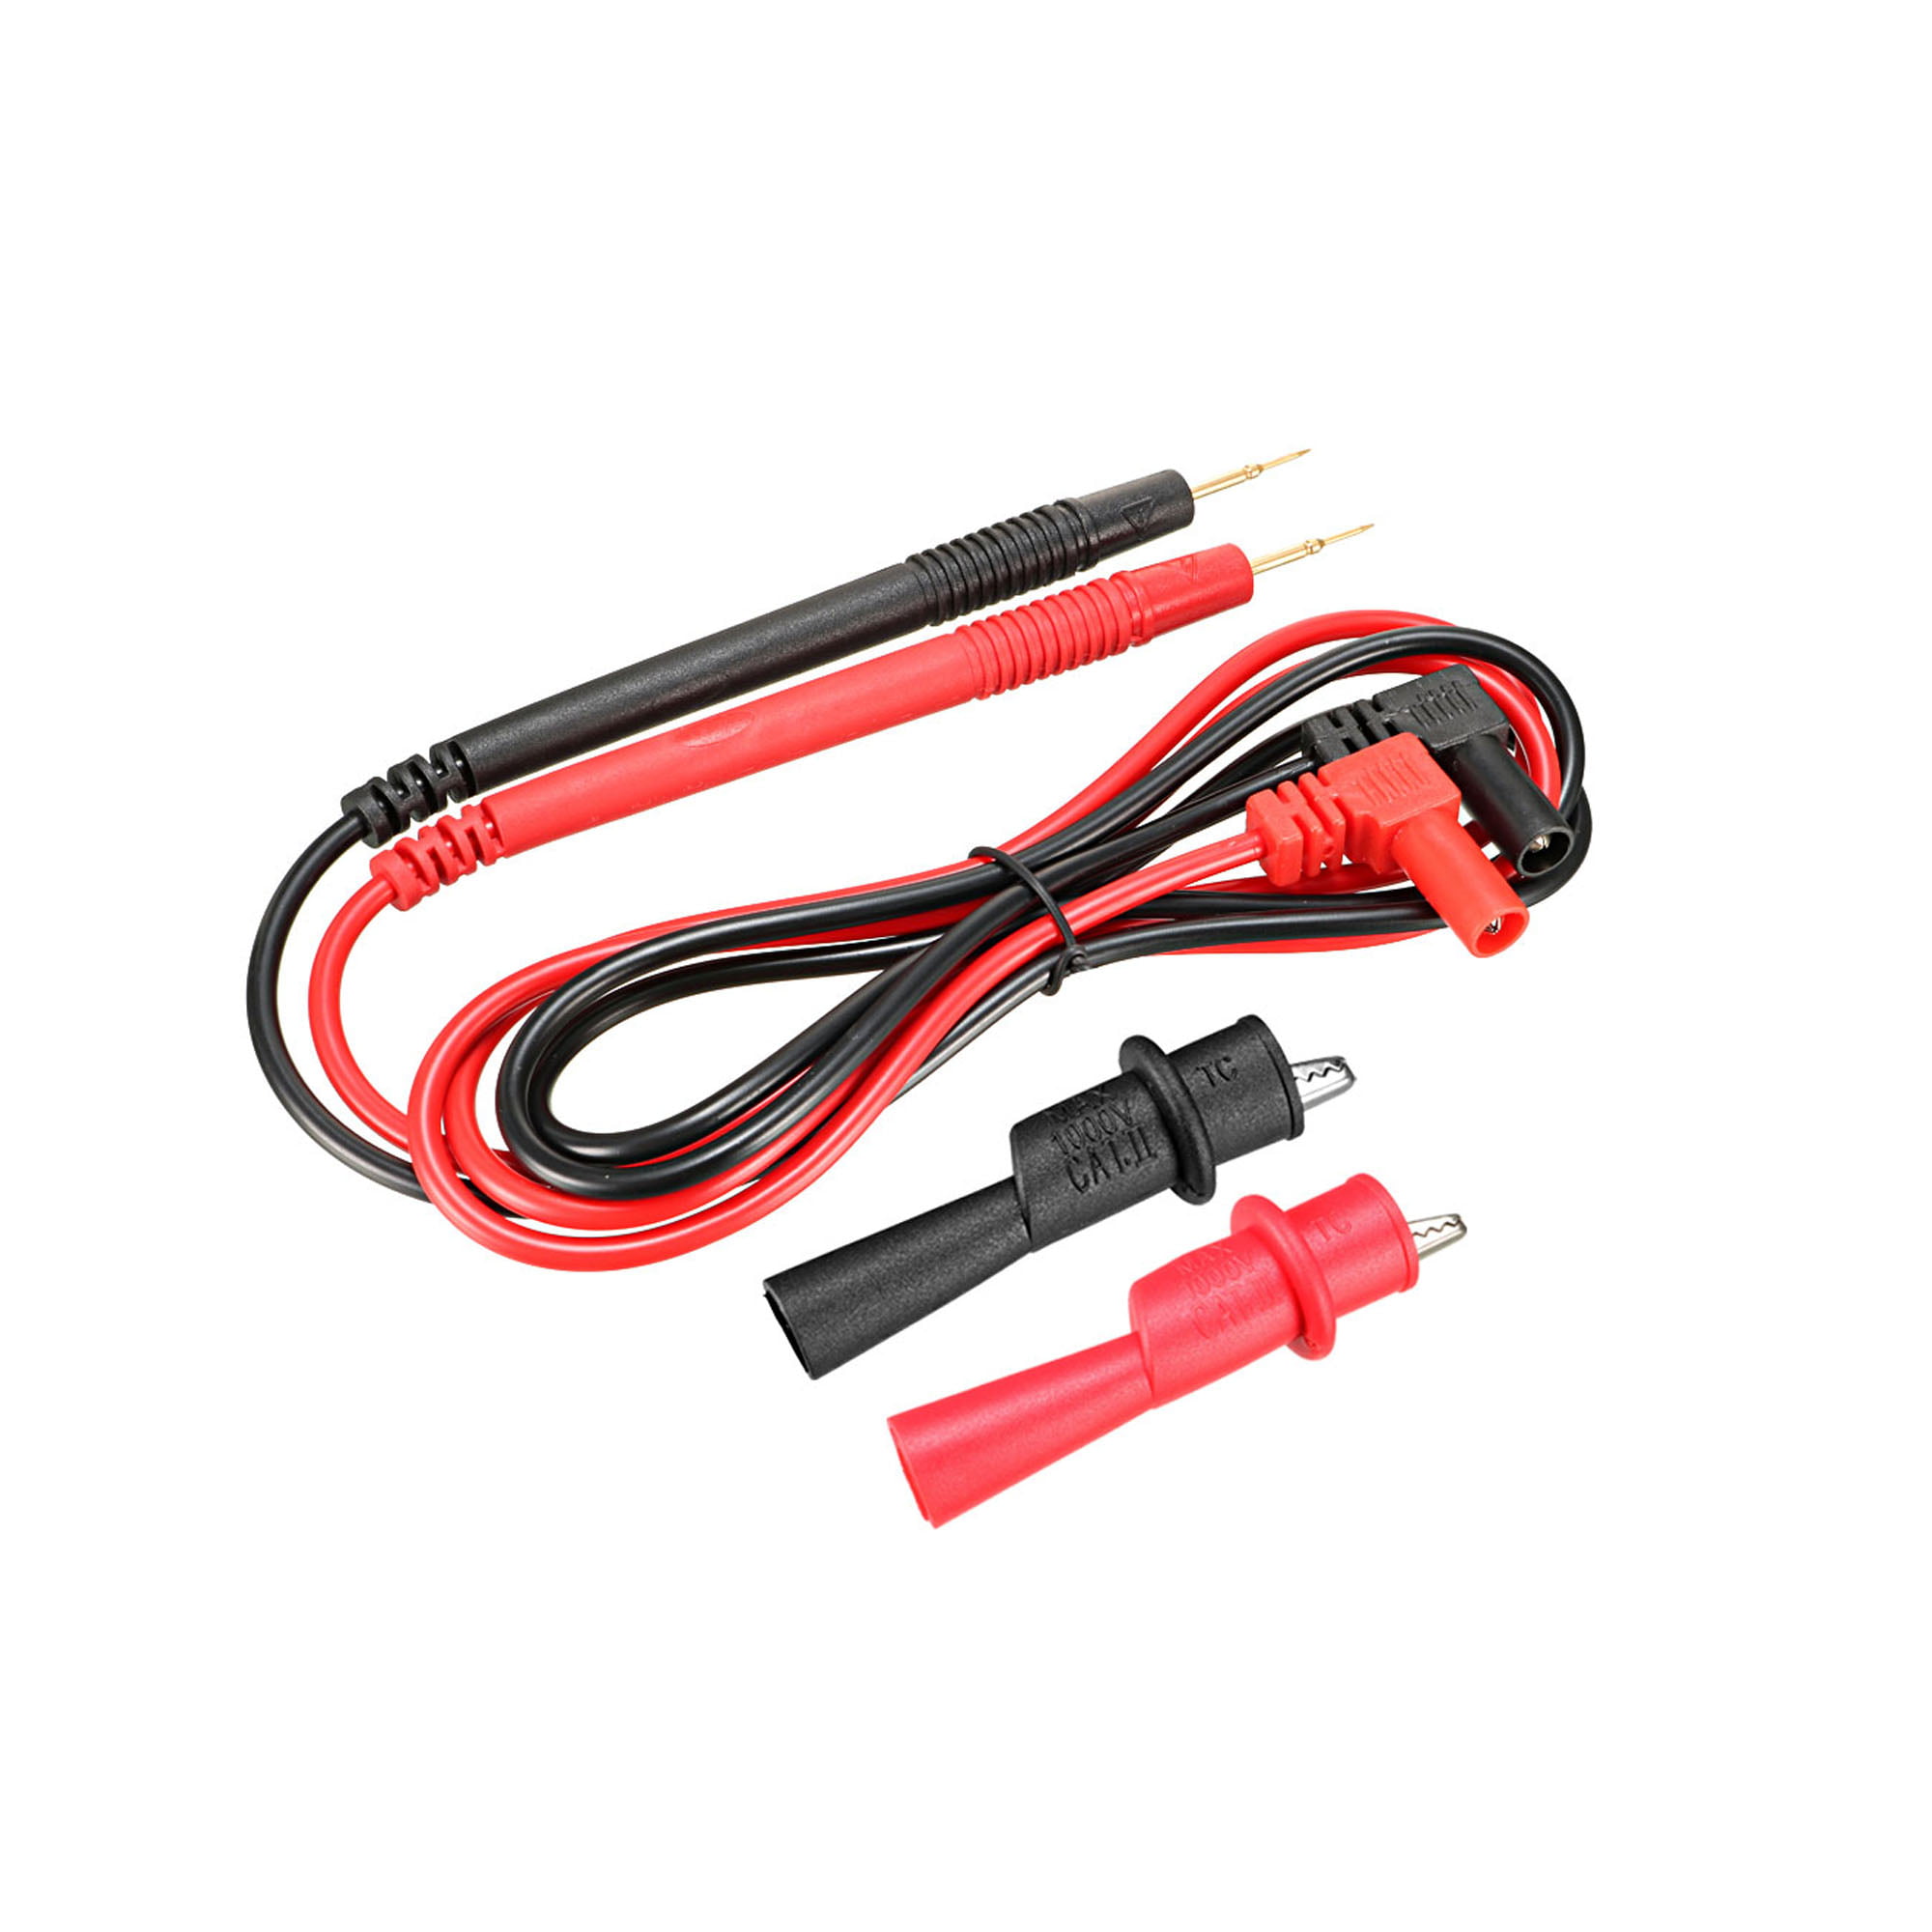 Pair of Multimeter Test Probe Leads Banana Plug Connectors 1000V 10A 